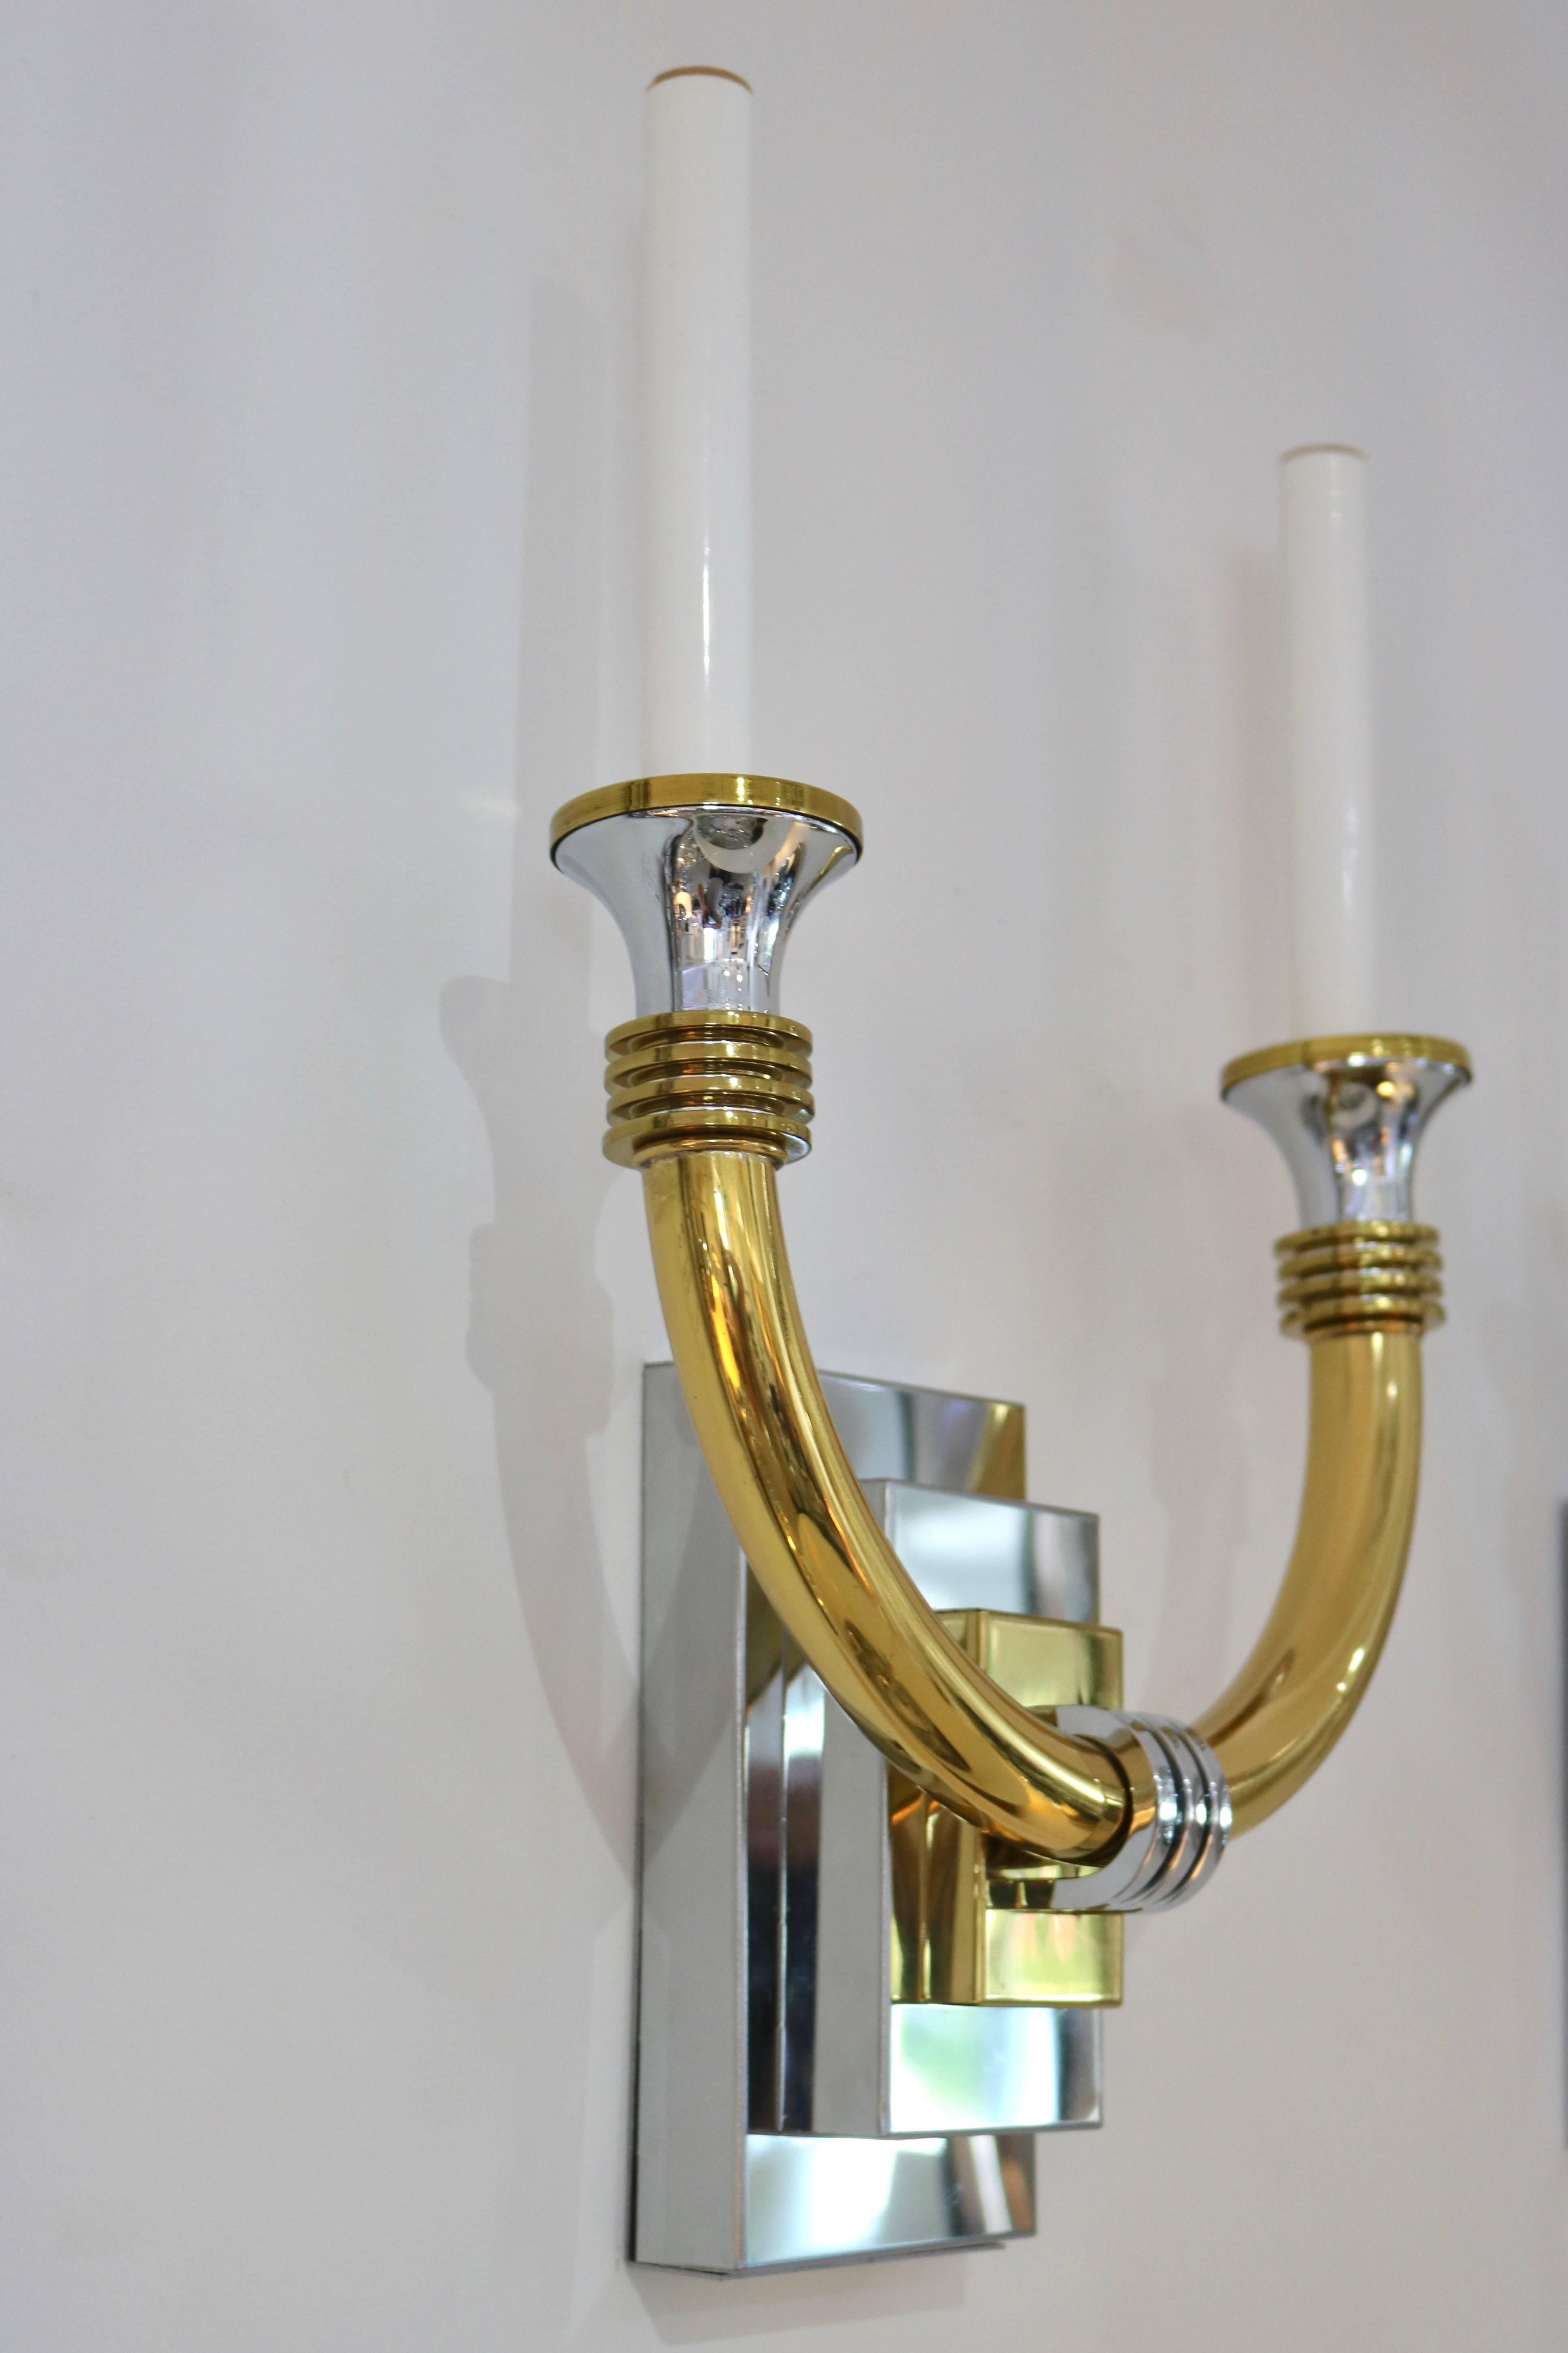 This handsome pair of wall sconces have taken the inspiration for the glamour of the Art Deco period and pieces that were produced in the 1980s. They are in polished chrome and brass and were produced in Italy.

Note: The lead photo shows flecks on